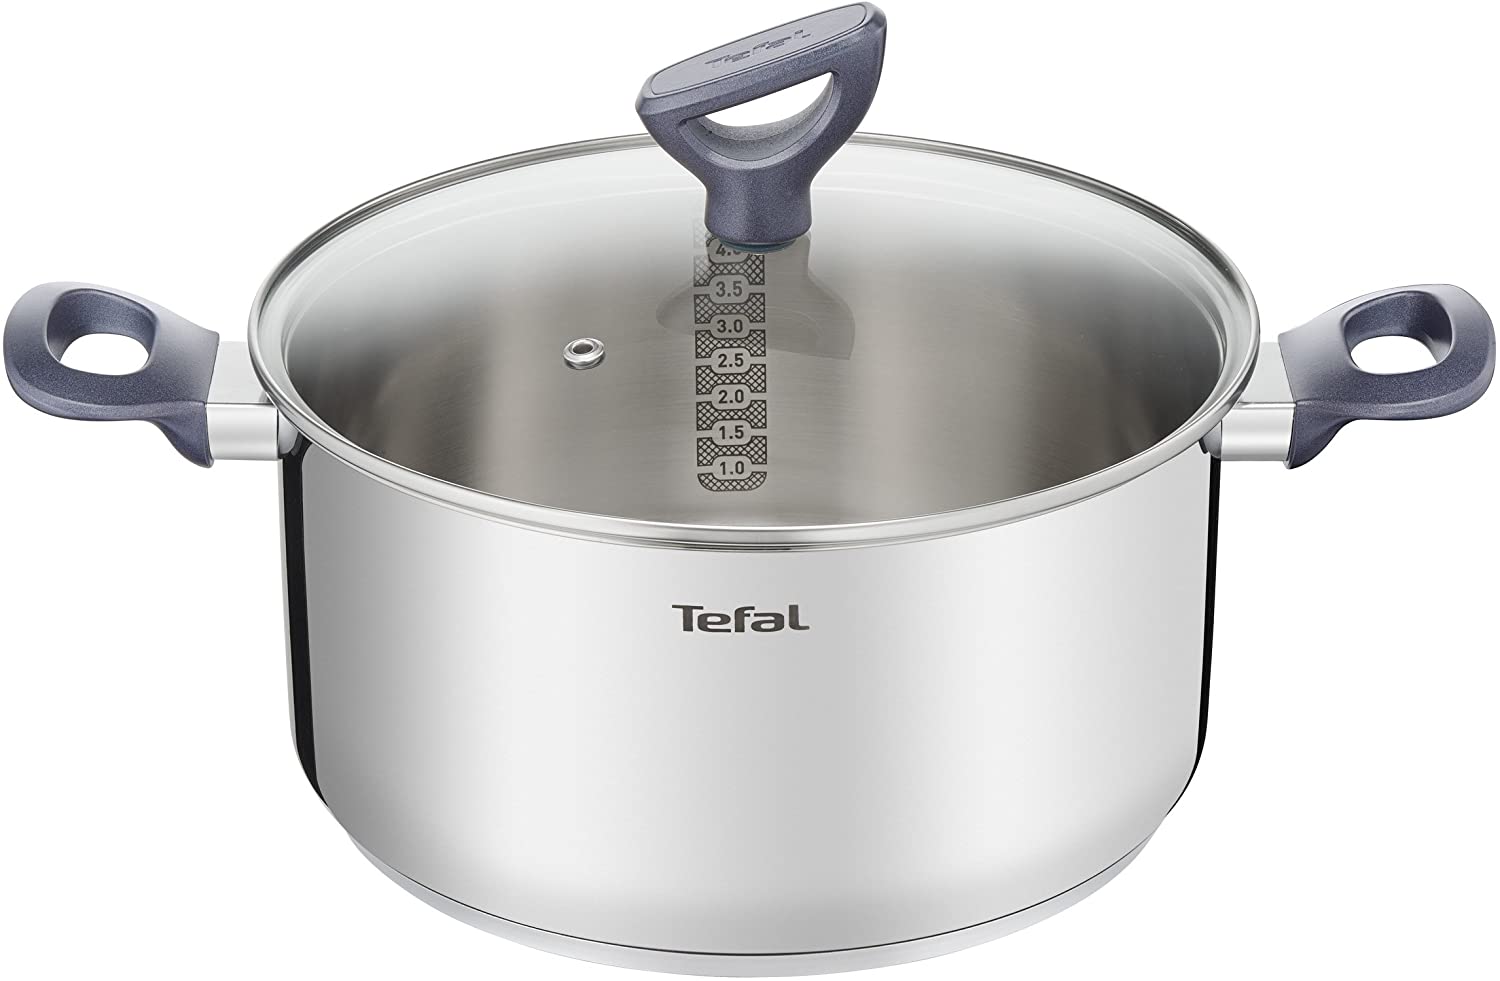 Tefal Daily Cook Saucepan, Stainless Steel